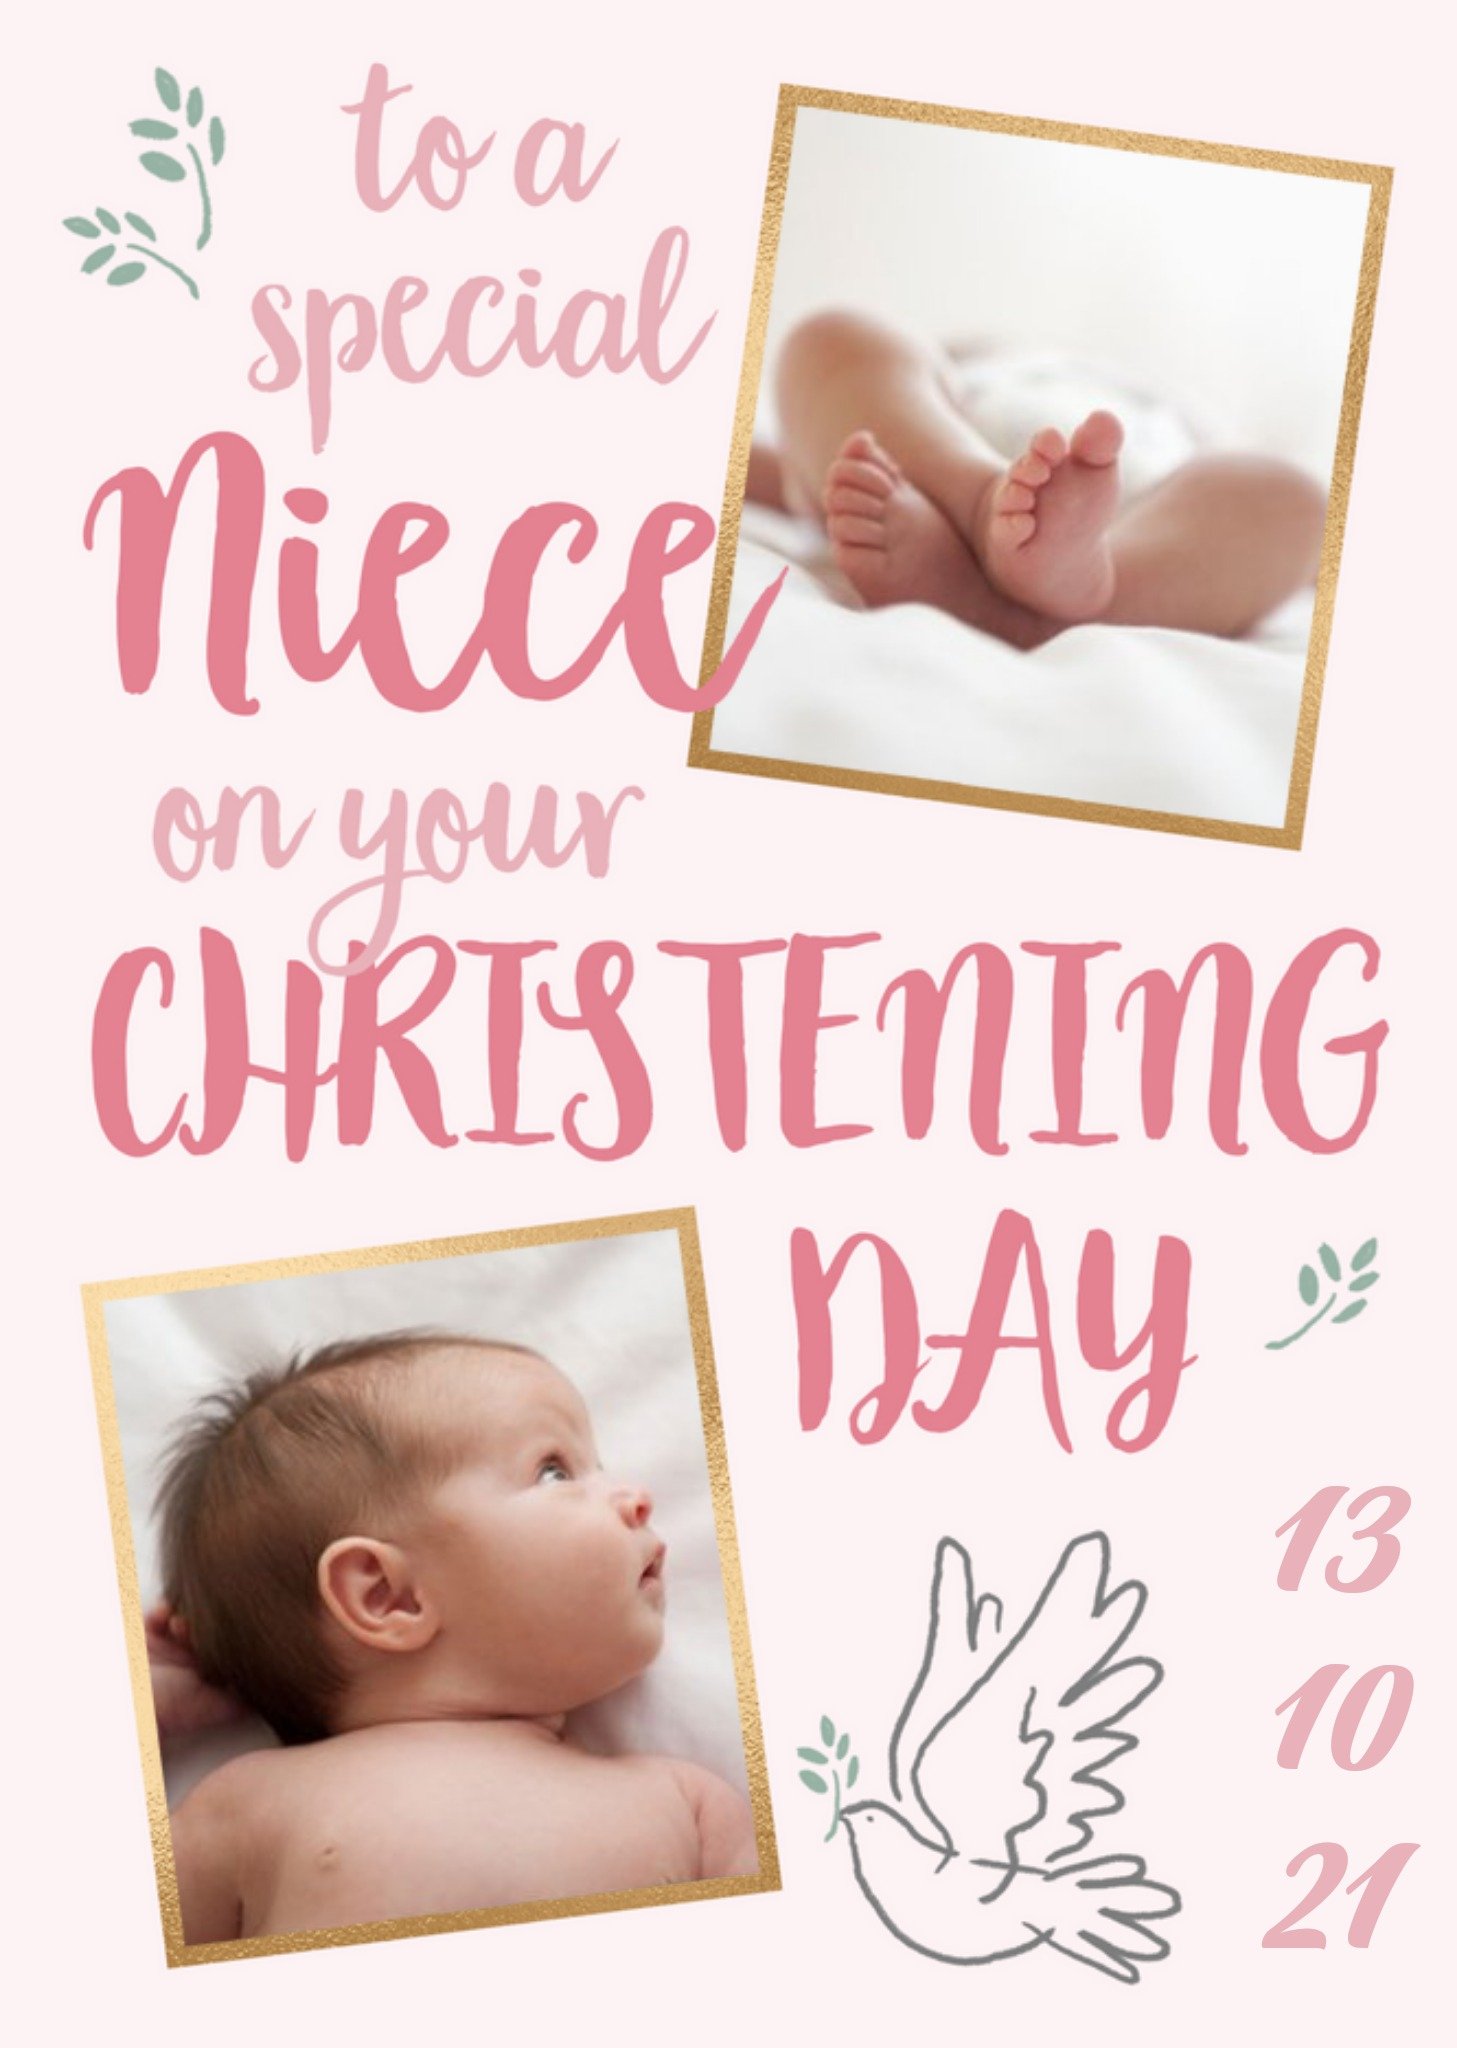 Moonpig Typographic Photo Upload Niece Personalise Date Christening Card, Large